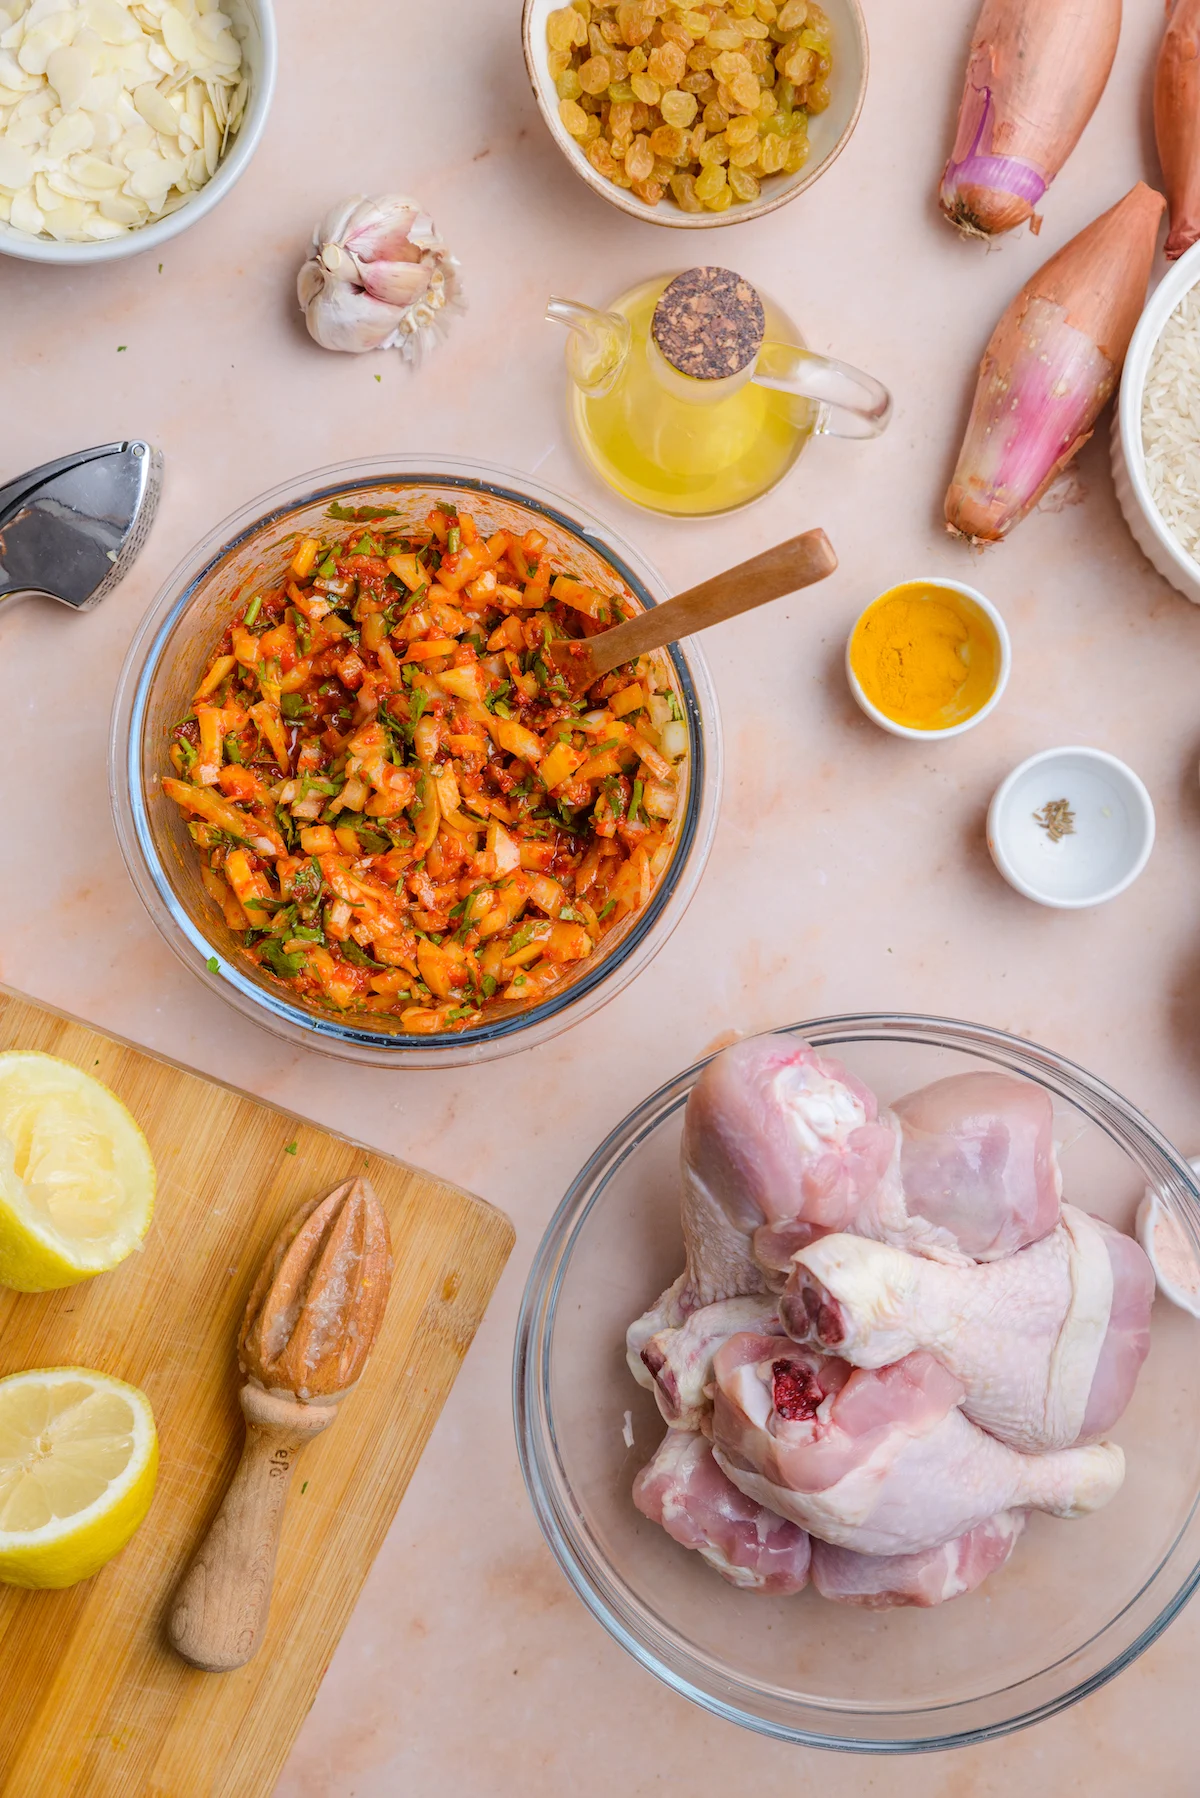 Chicken in a marinade sits on the countertop with the other ingredients for the dish surrounding it.